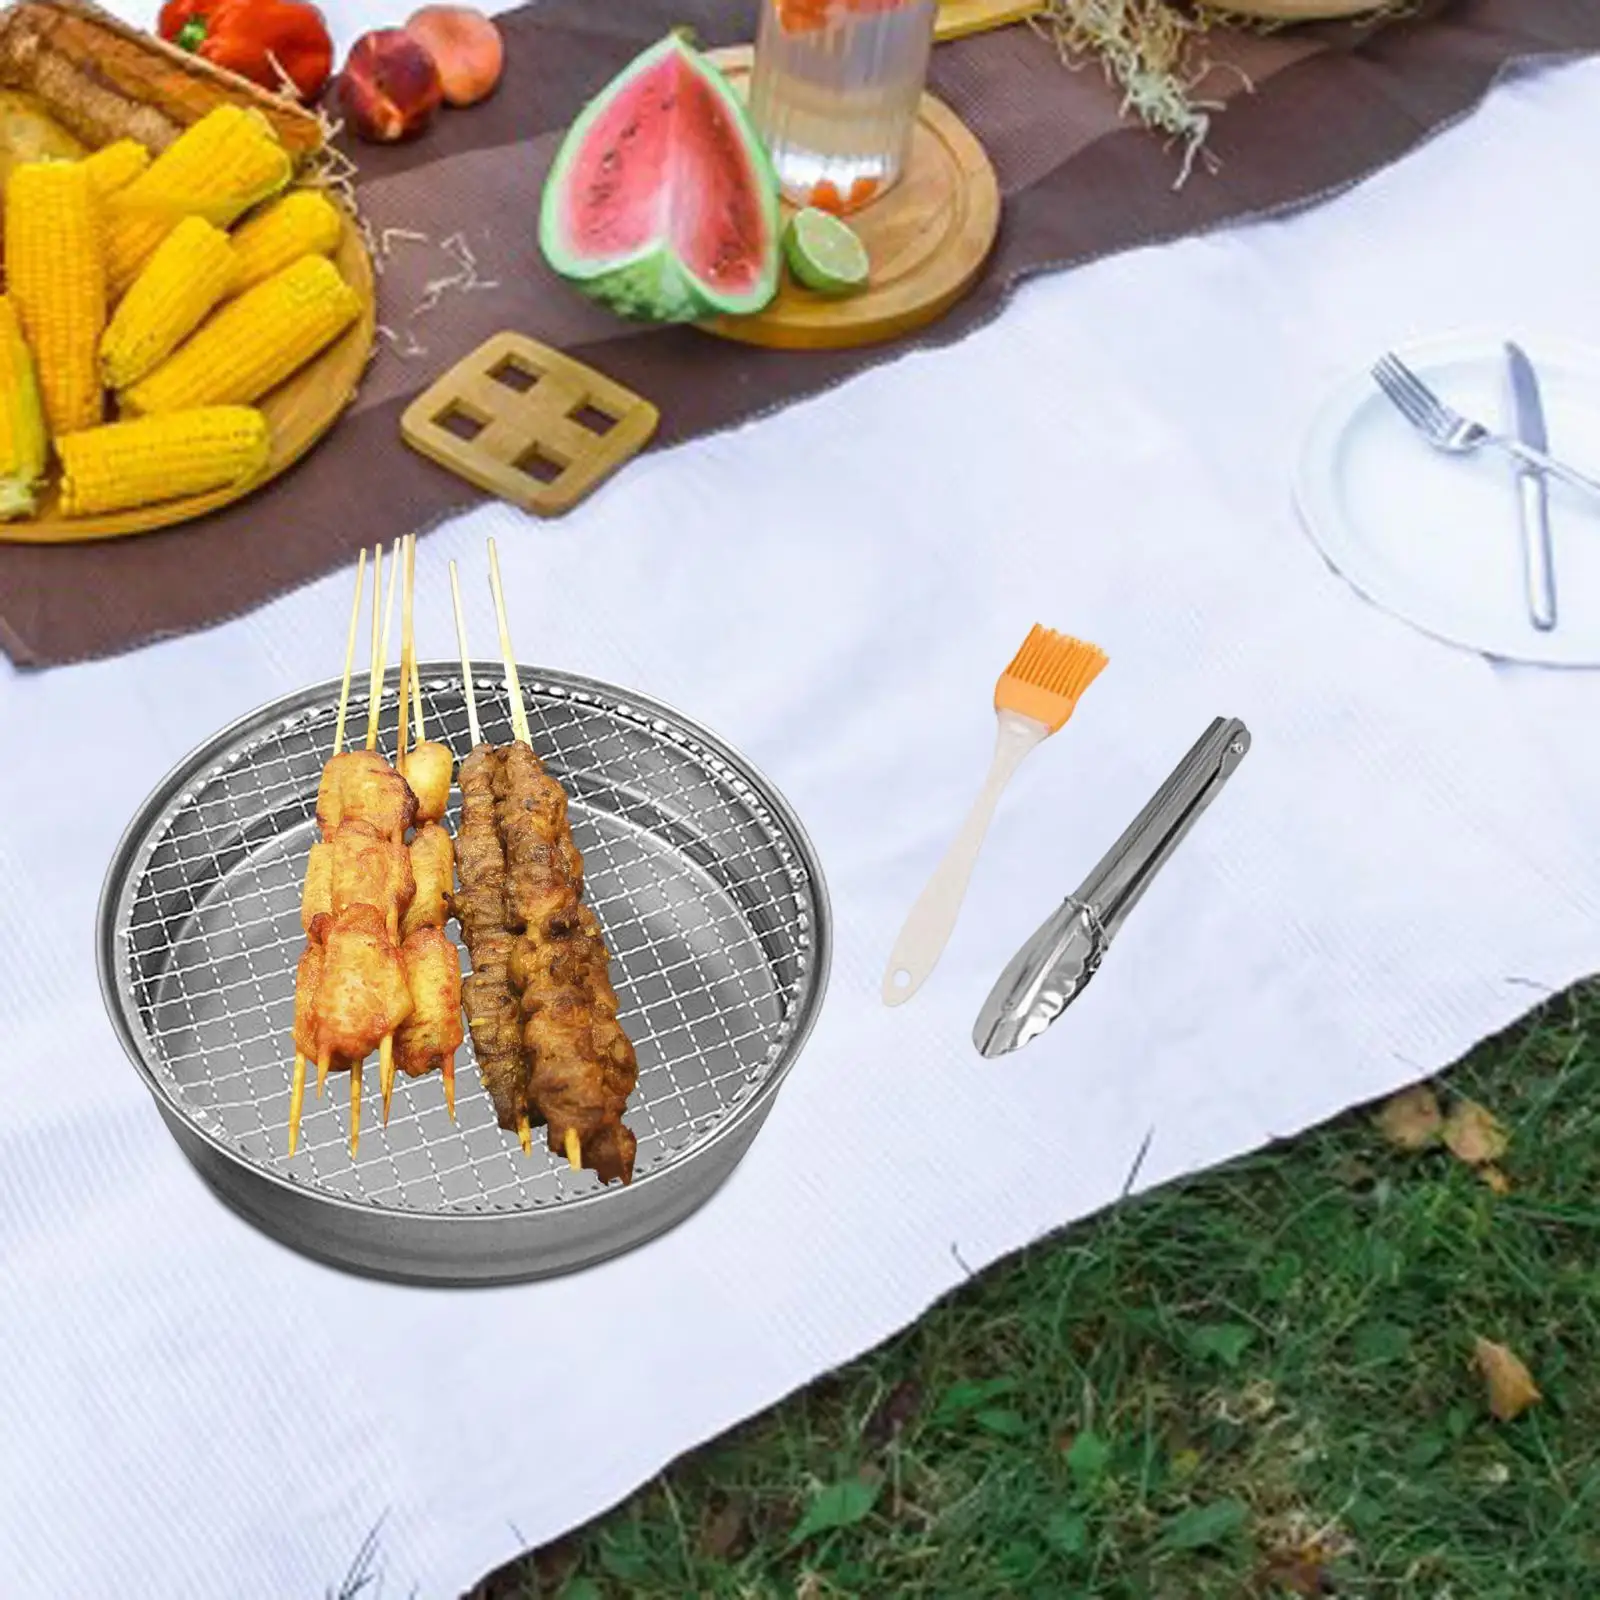 Disposable Charcoal Grill BBQ Grill with Brush and Clip Portable Charcoal Barbecue Grill for Travel Picnic Cooking Hiking Patio